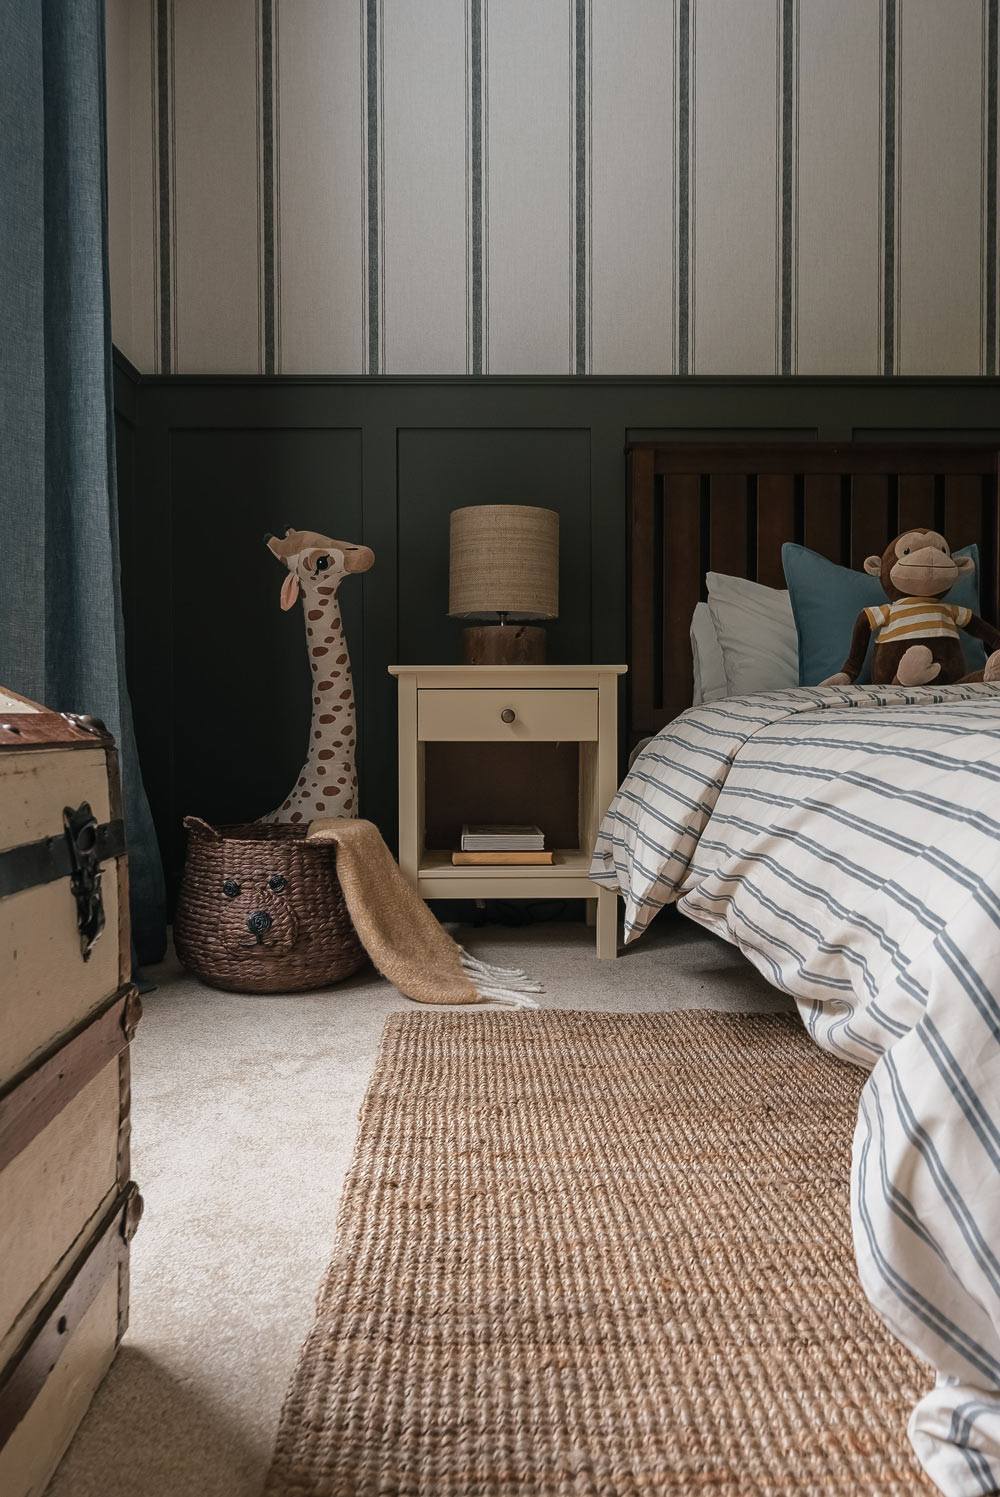 The corner of a child’s bedroom decorated with a teddy bear basket, giraffe toy, nightstand, and the side of a bed.